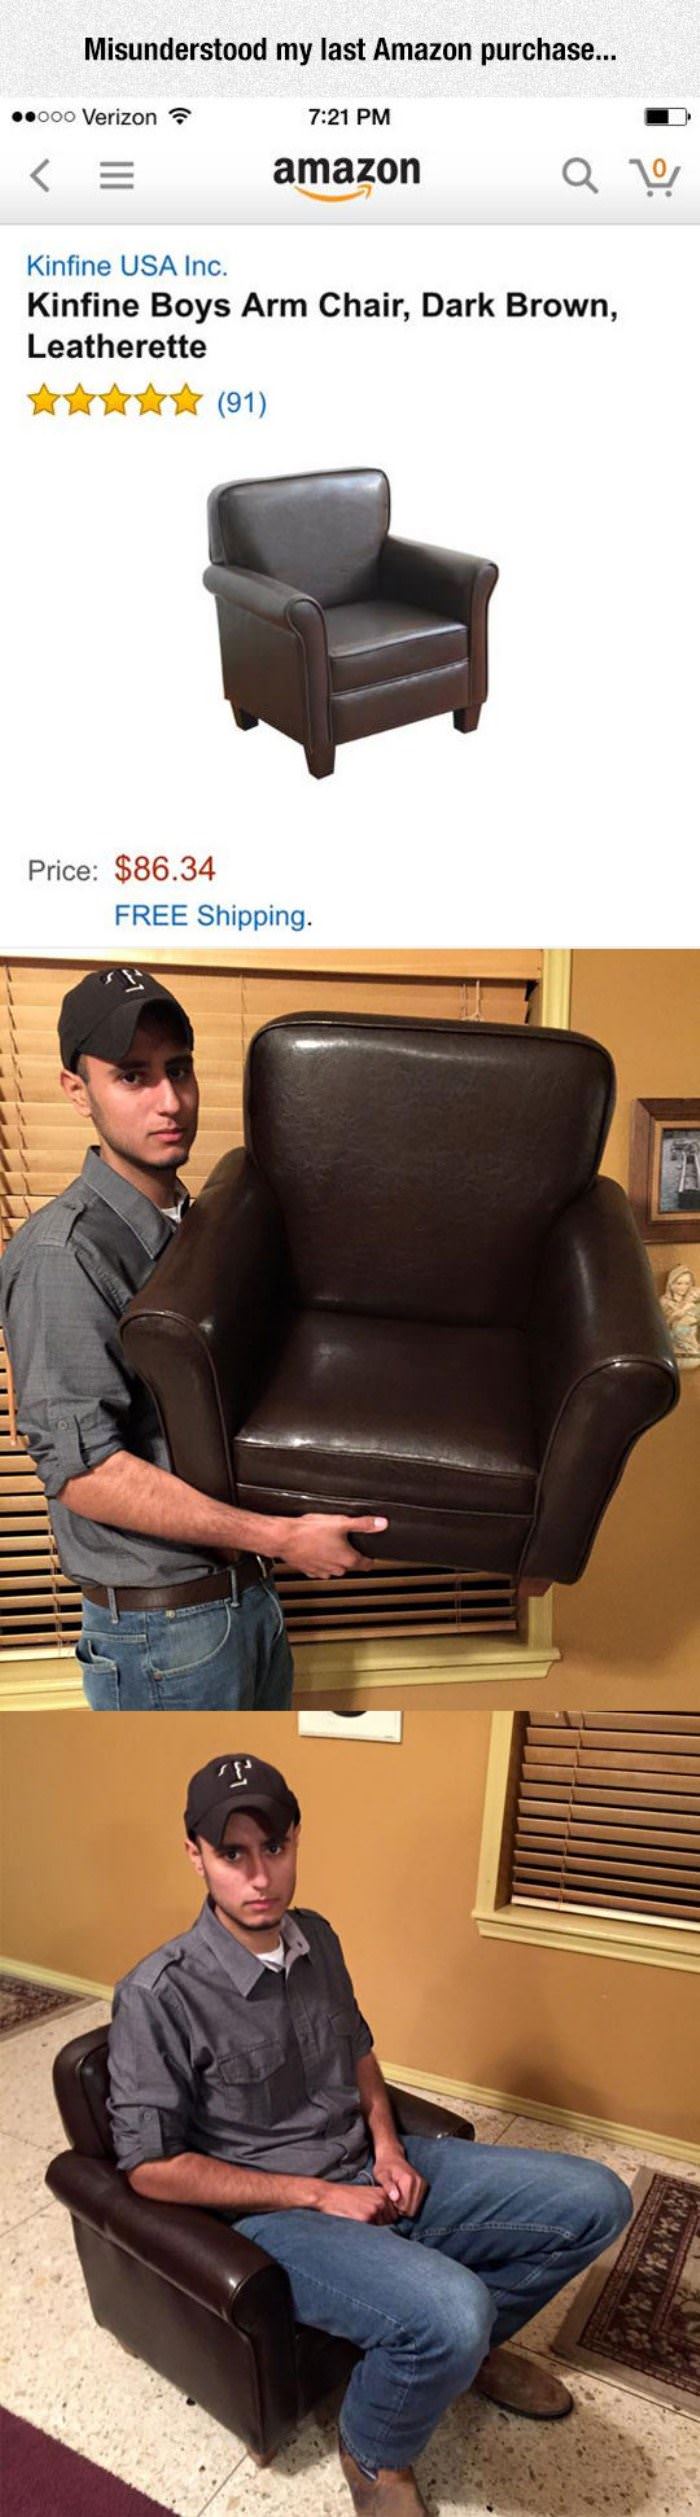 nice arm chair funny picture